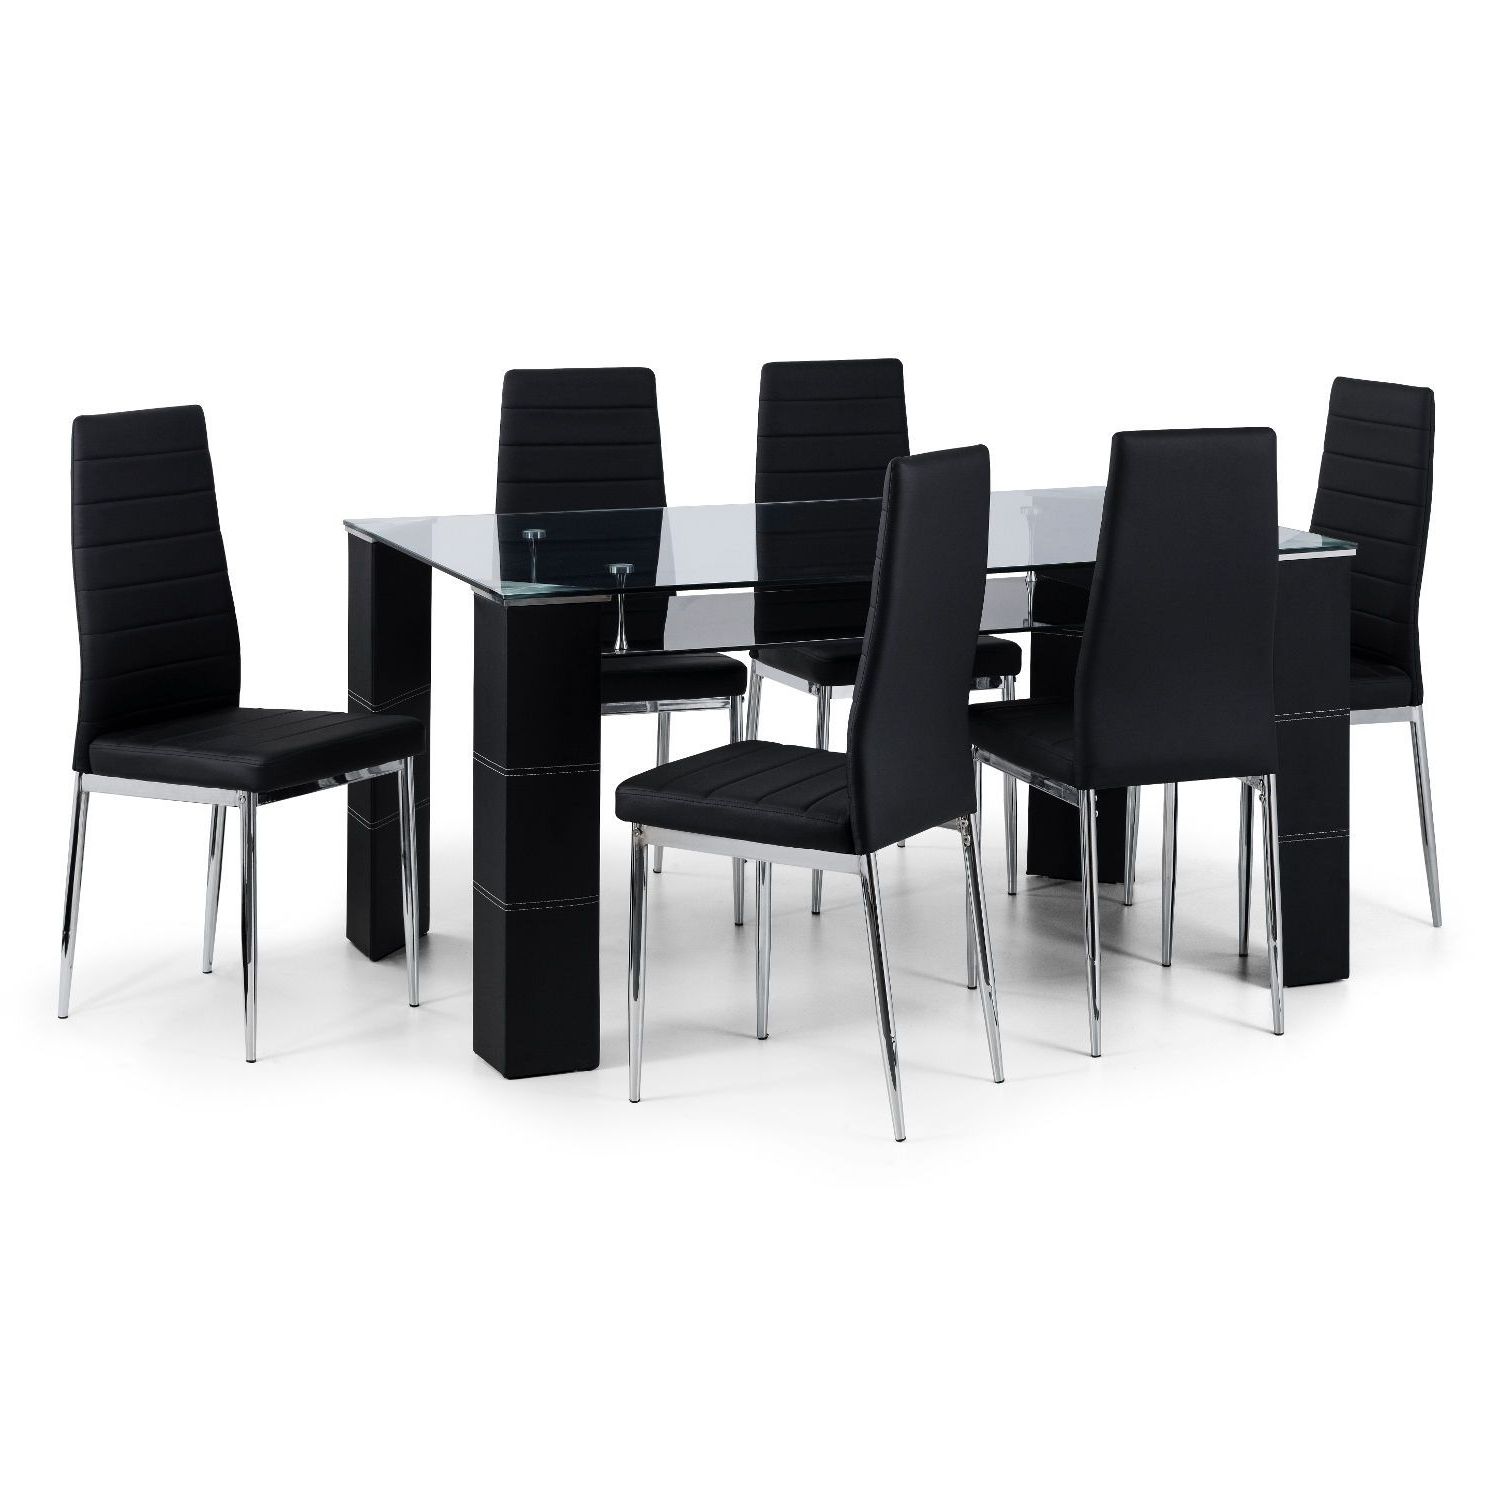 Dining And Glass Regarding 2018 Glass 6 Seater Dining Tables (View 12 of 25)